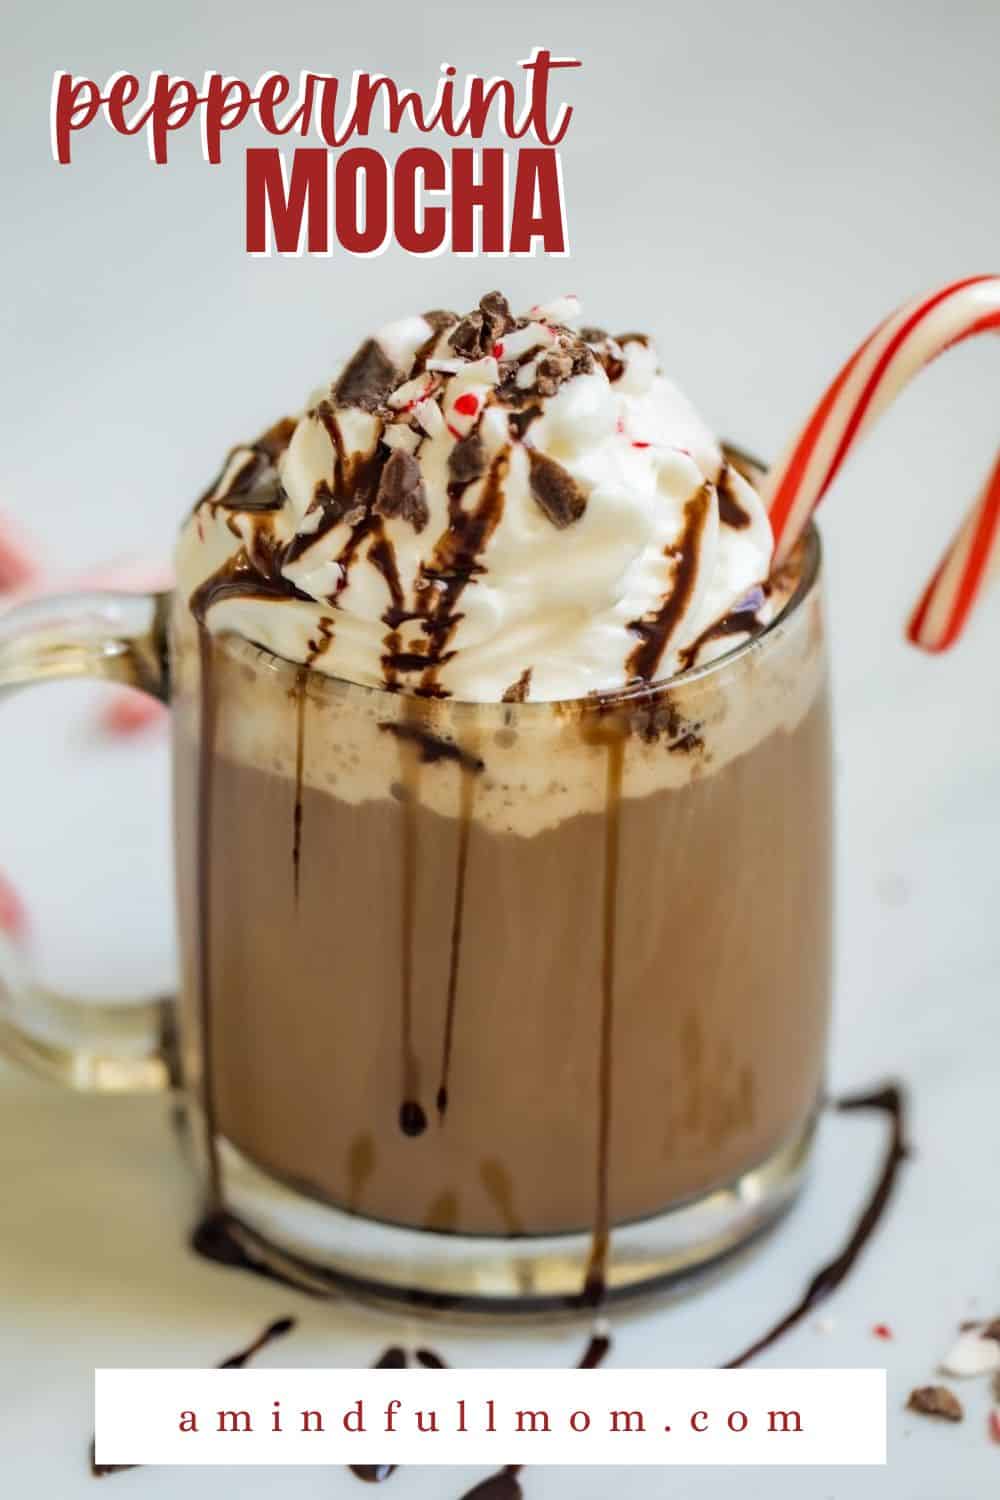 This Peppermint Mocha Recipe allows you to quickly enjoy a copycat version of your favorite holiday Starbucks right in the comfort of your own home. And just like your favorite coffee chain, you can customize this Peppermint Mocha any way you like--just without a surcharge!  